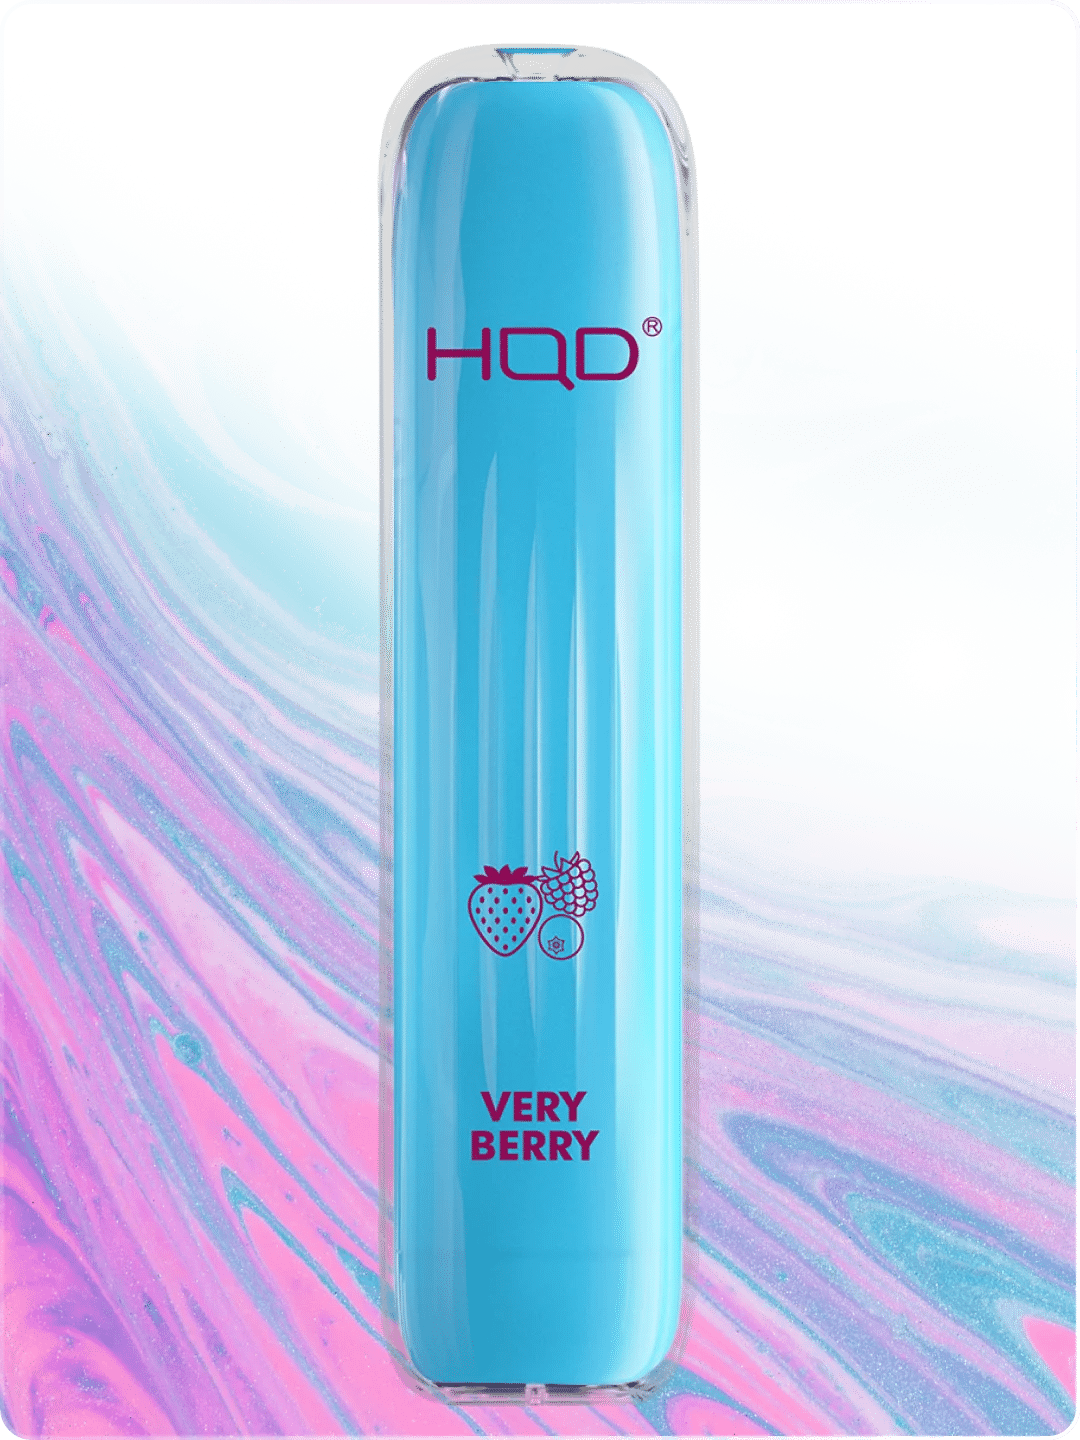 HQD POD DESECHABLE  VERY BERRY  600 PUFFS_COPY